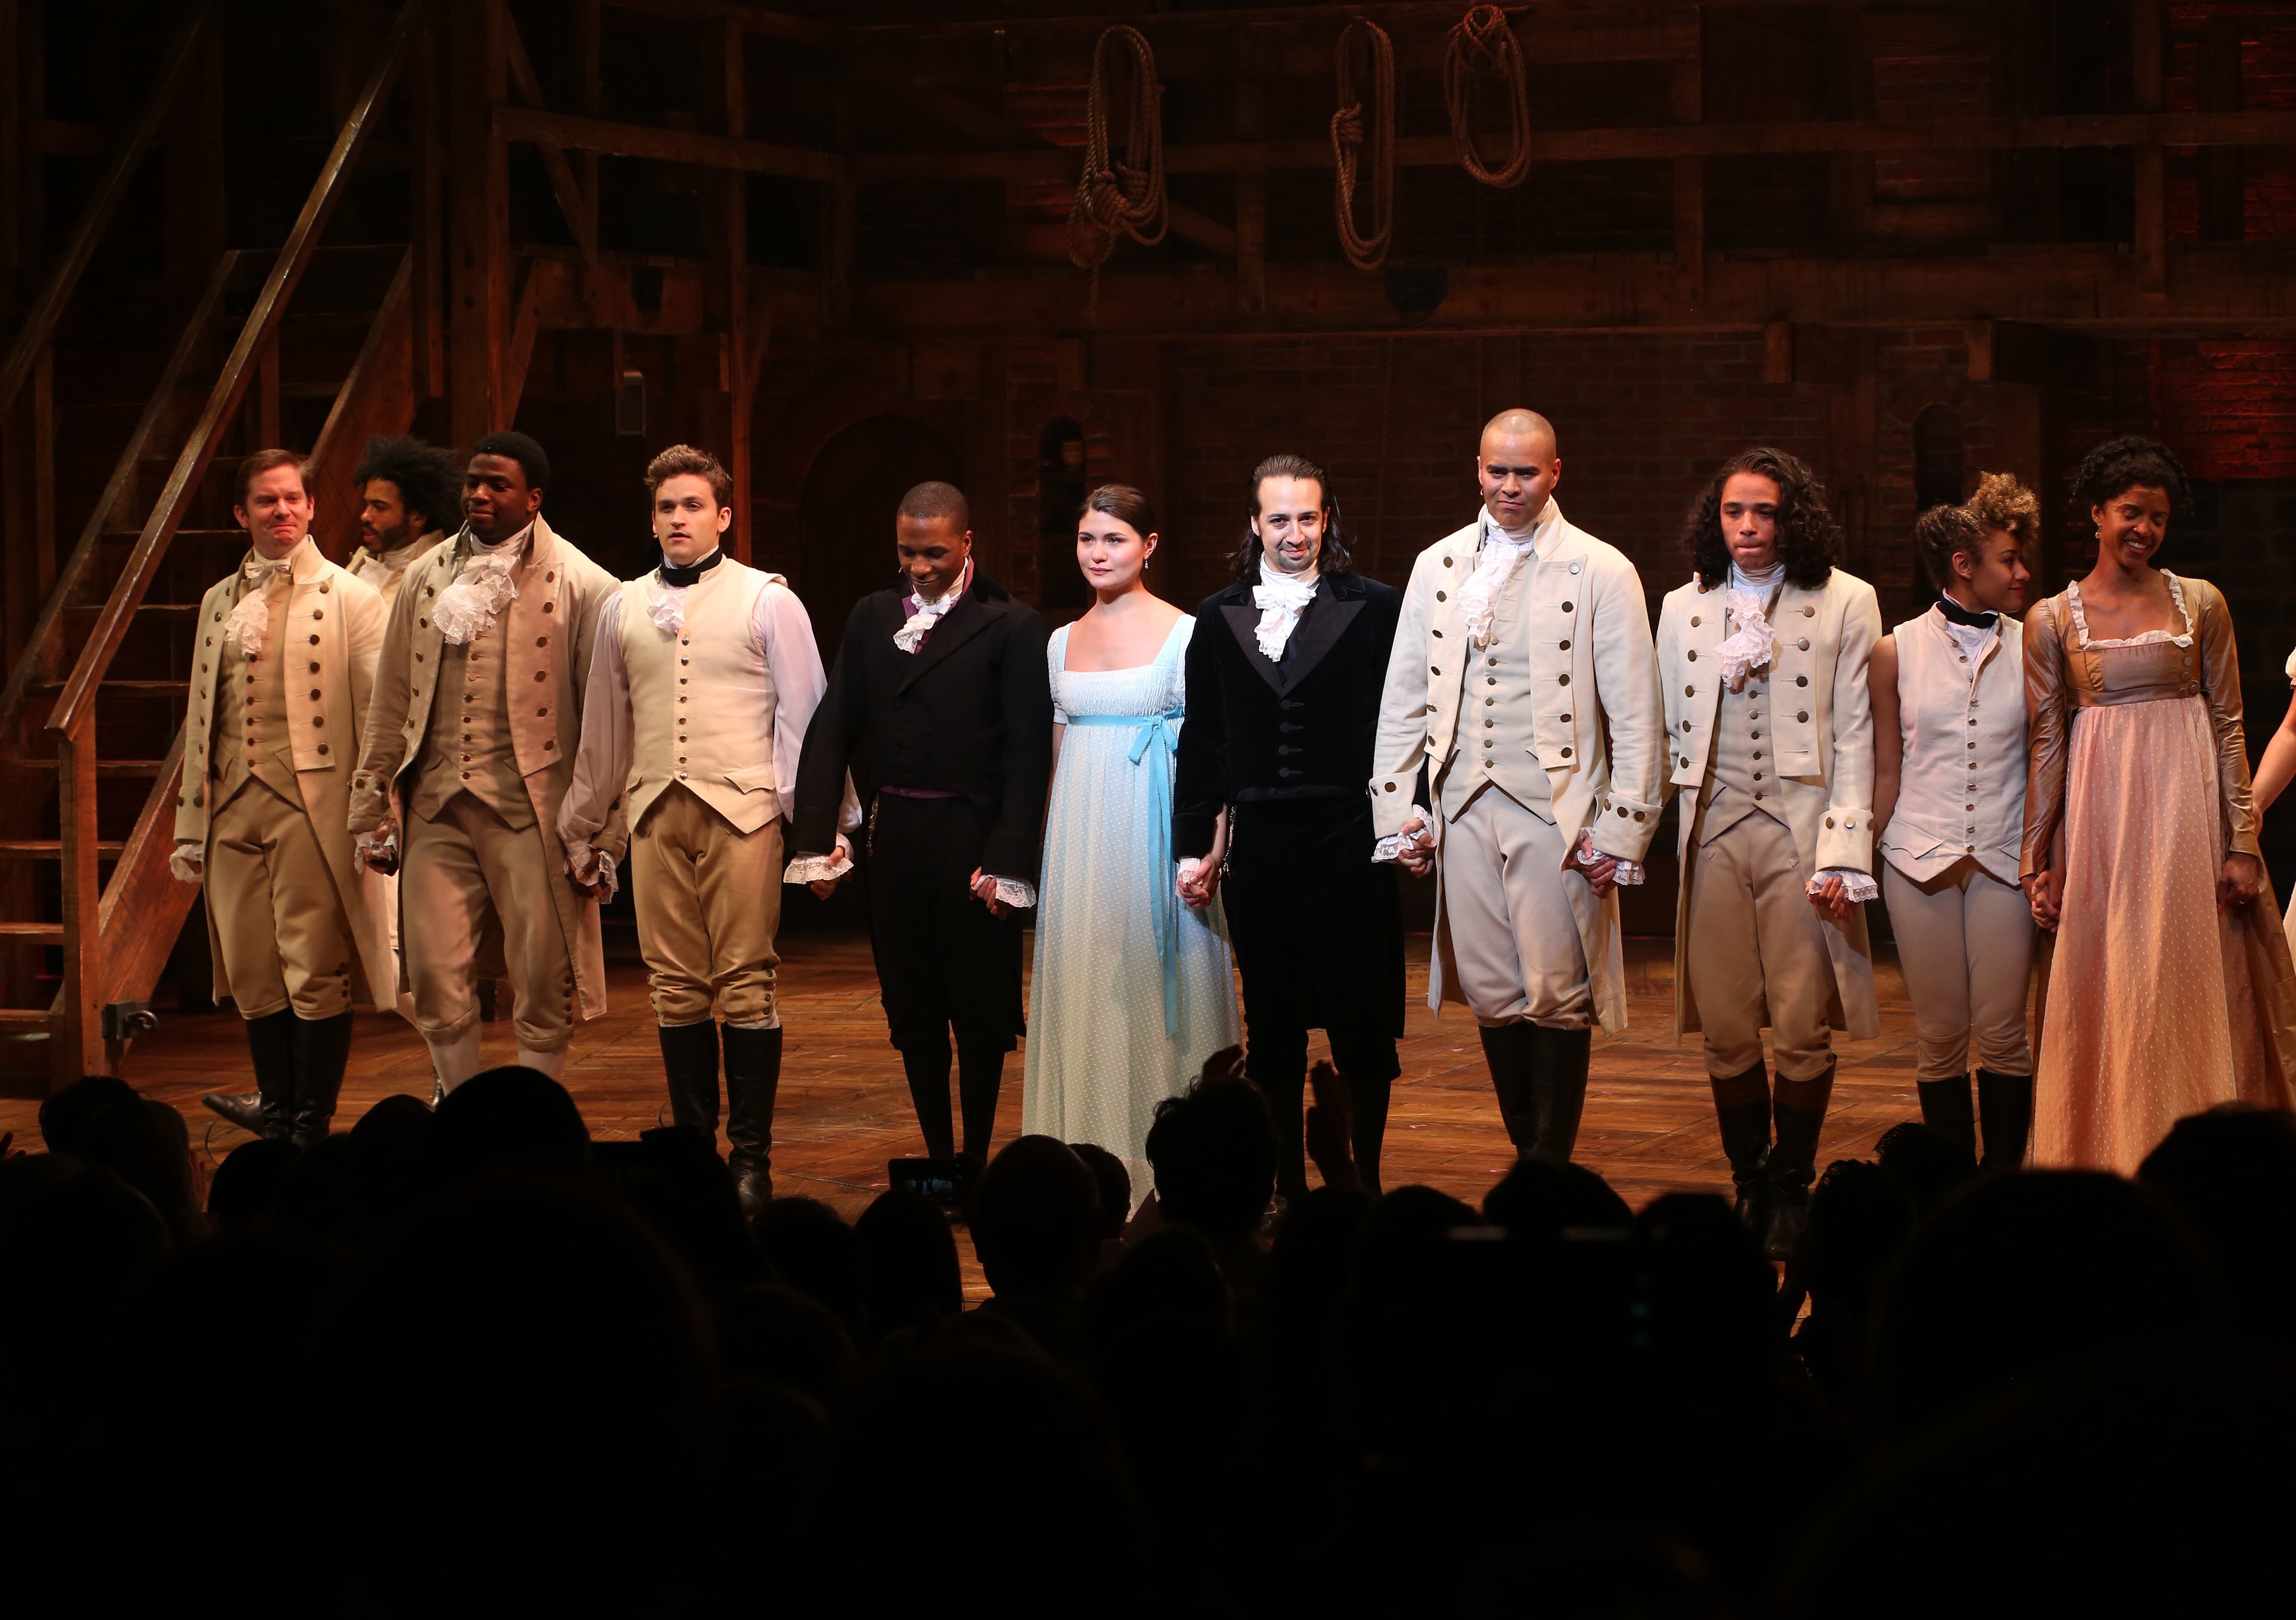 Leslie Odom Jr., Phillipa Soo, and Ariana DeBose with Lin-Manuel Miranda with the cast during their final performance curtain call of 'Hamilton'